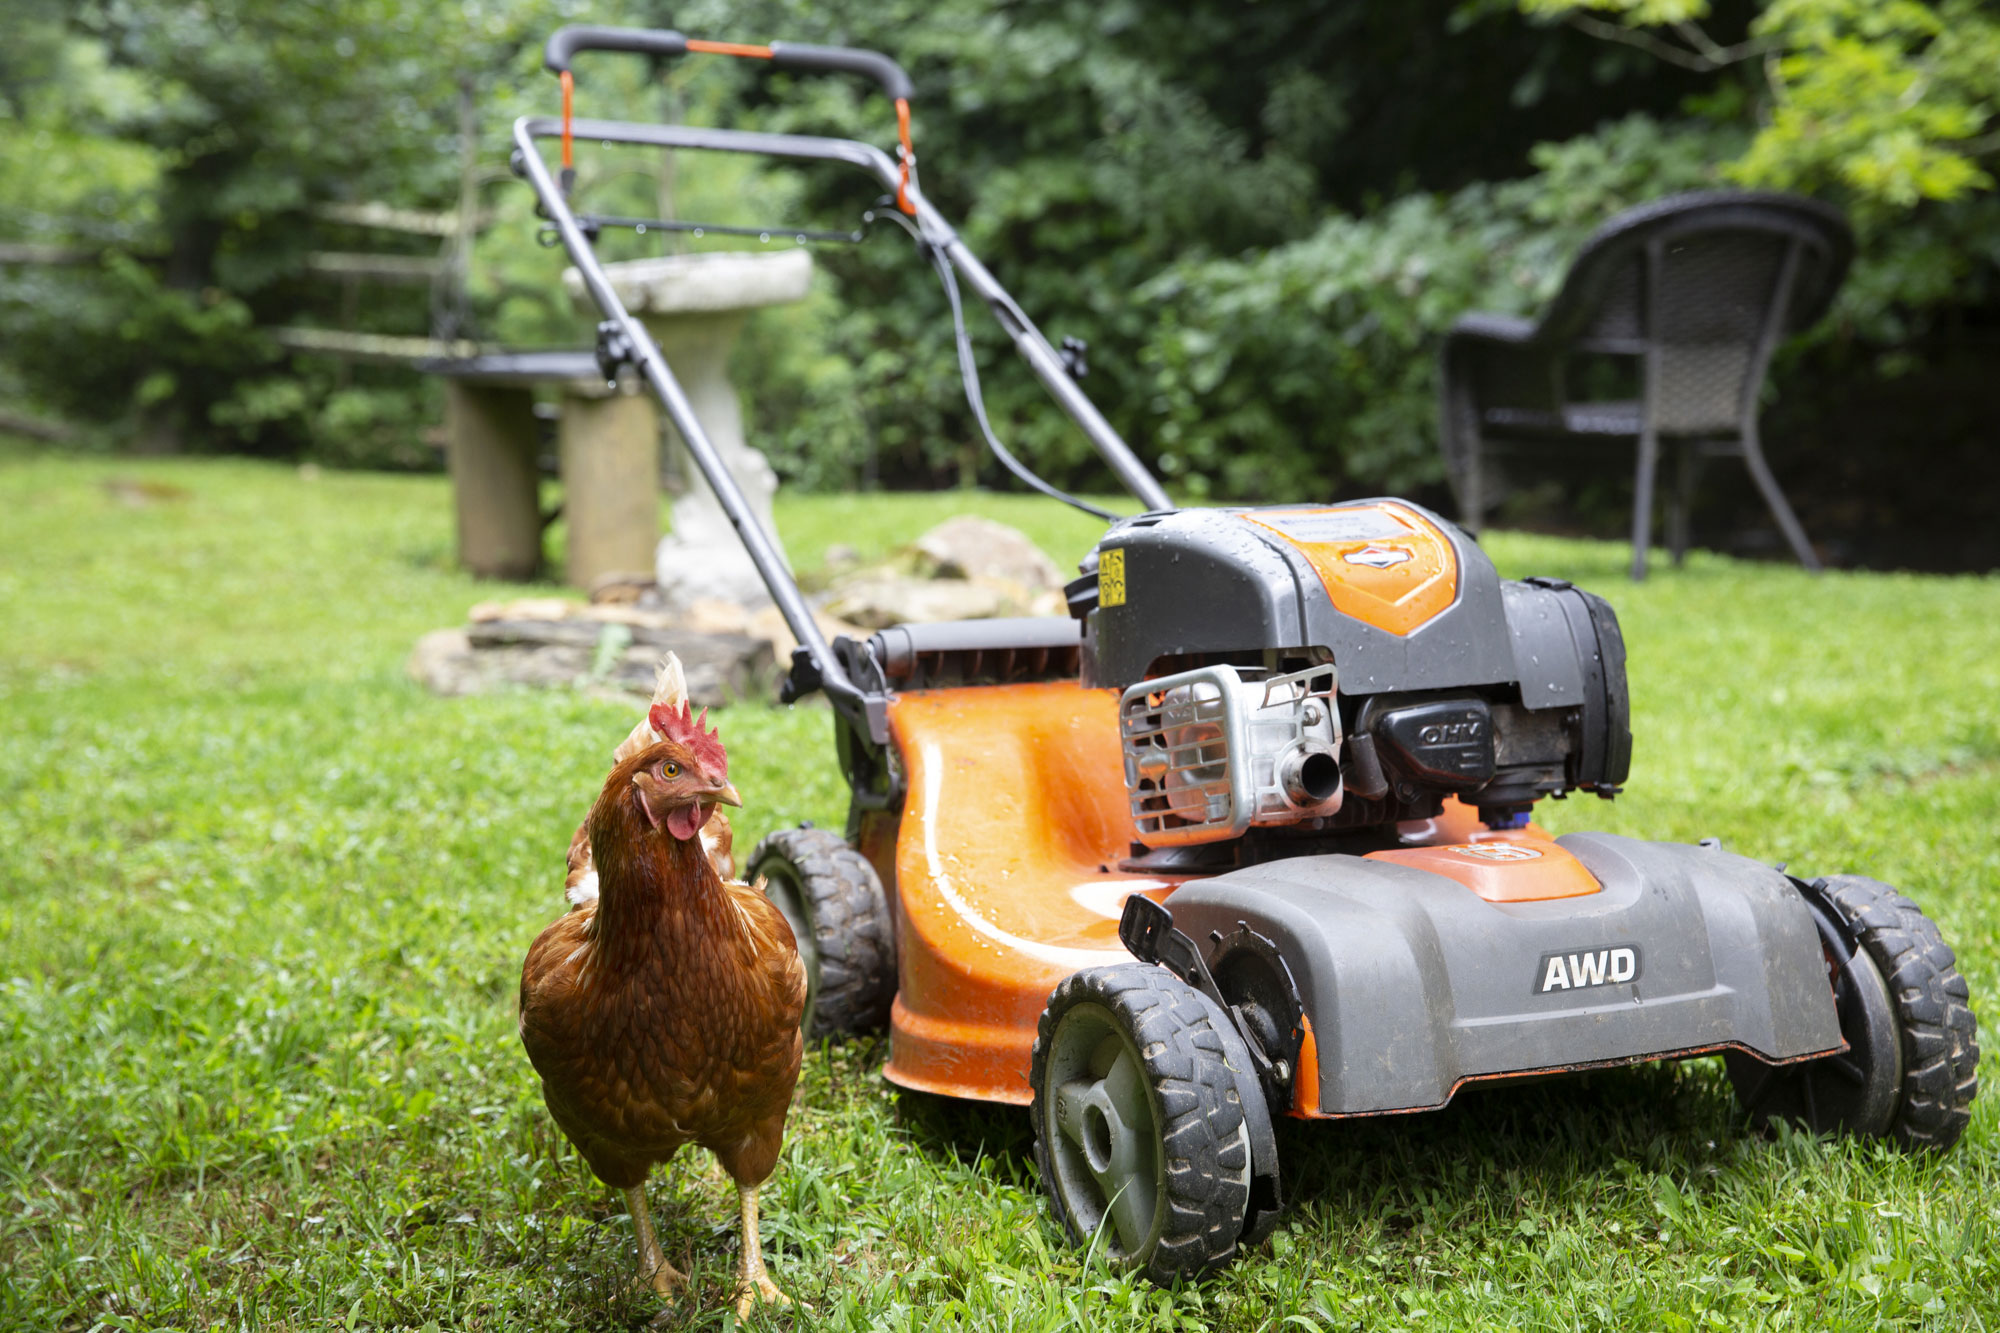 An orange and black lawnmower sits alongside a brown chicken